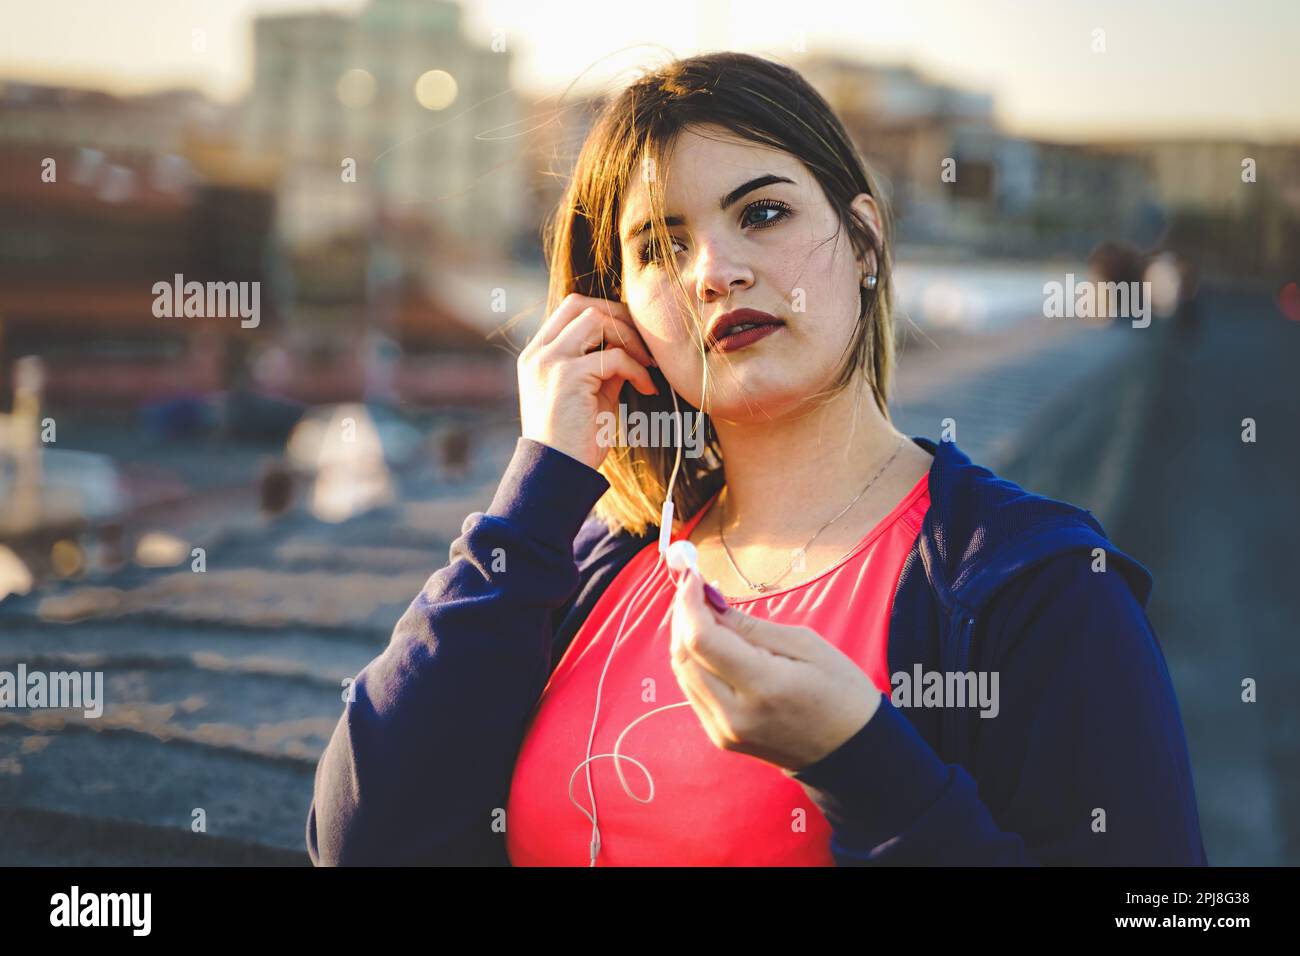 A young plus-size woman takes a break during her outdoor workout. She is wearing a jogging suit and is seen wearing wired earphones. The background sh Stock Photo